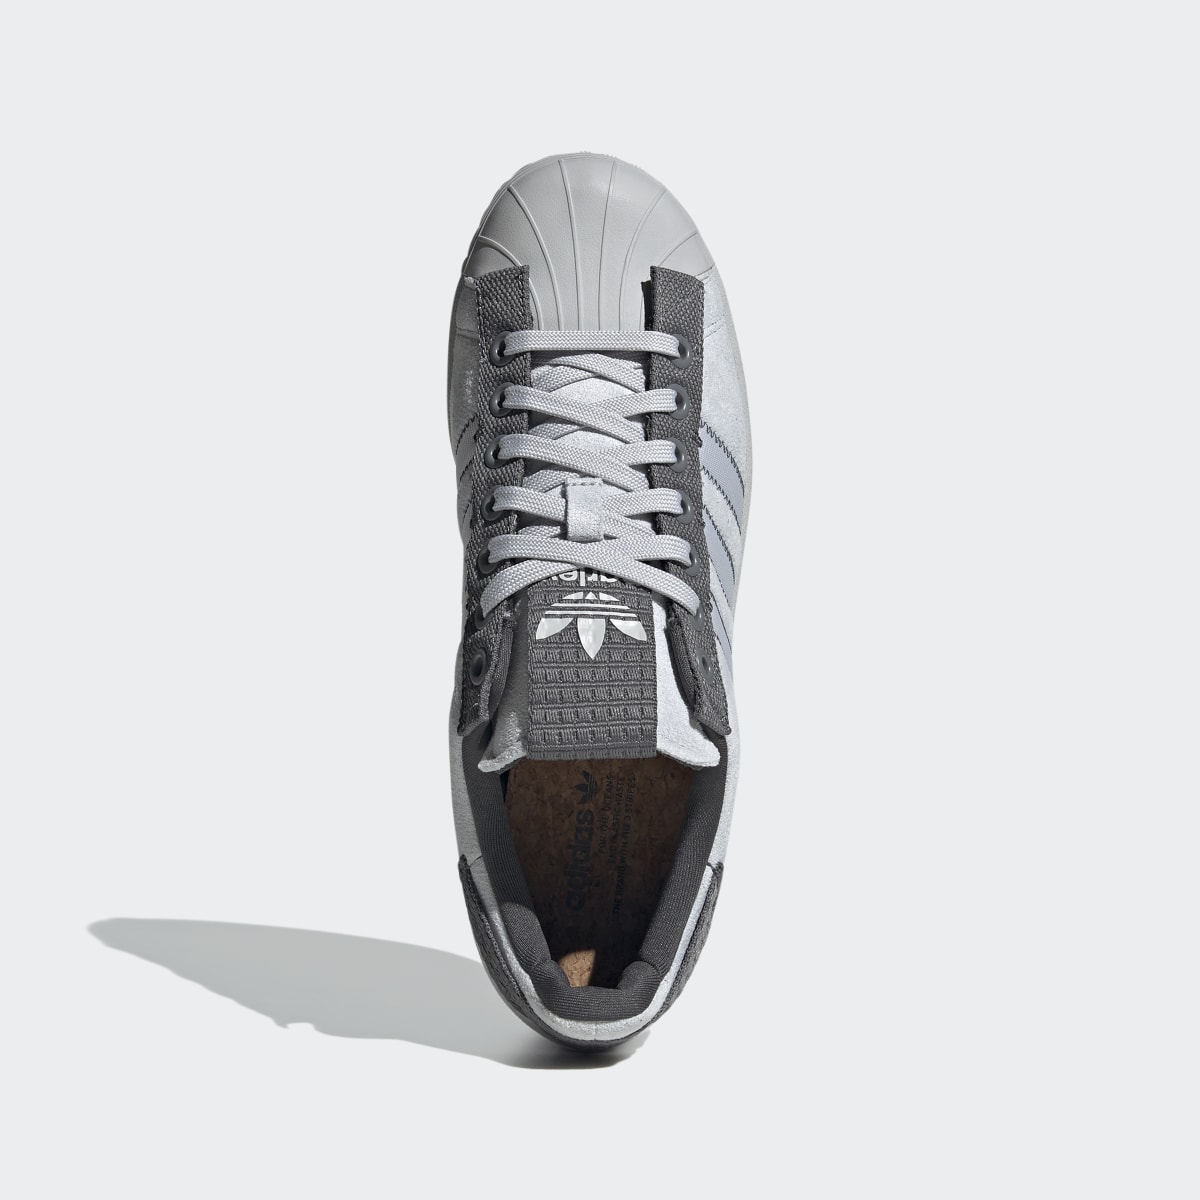 Adidas Superstar Parley Shoes. 6